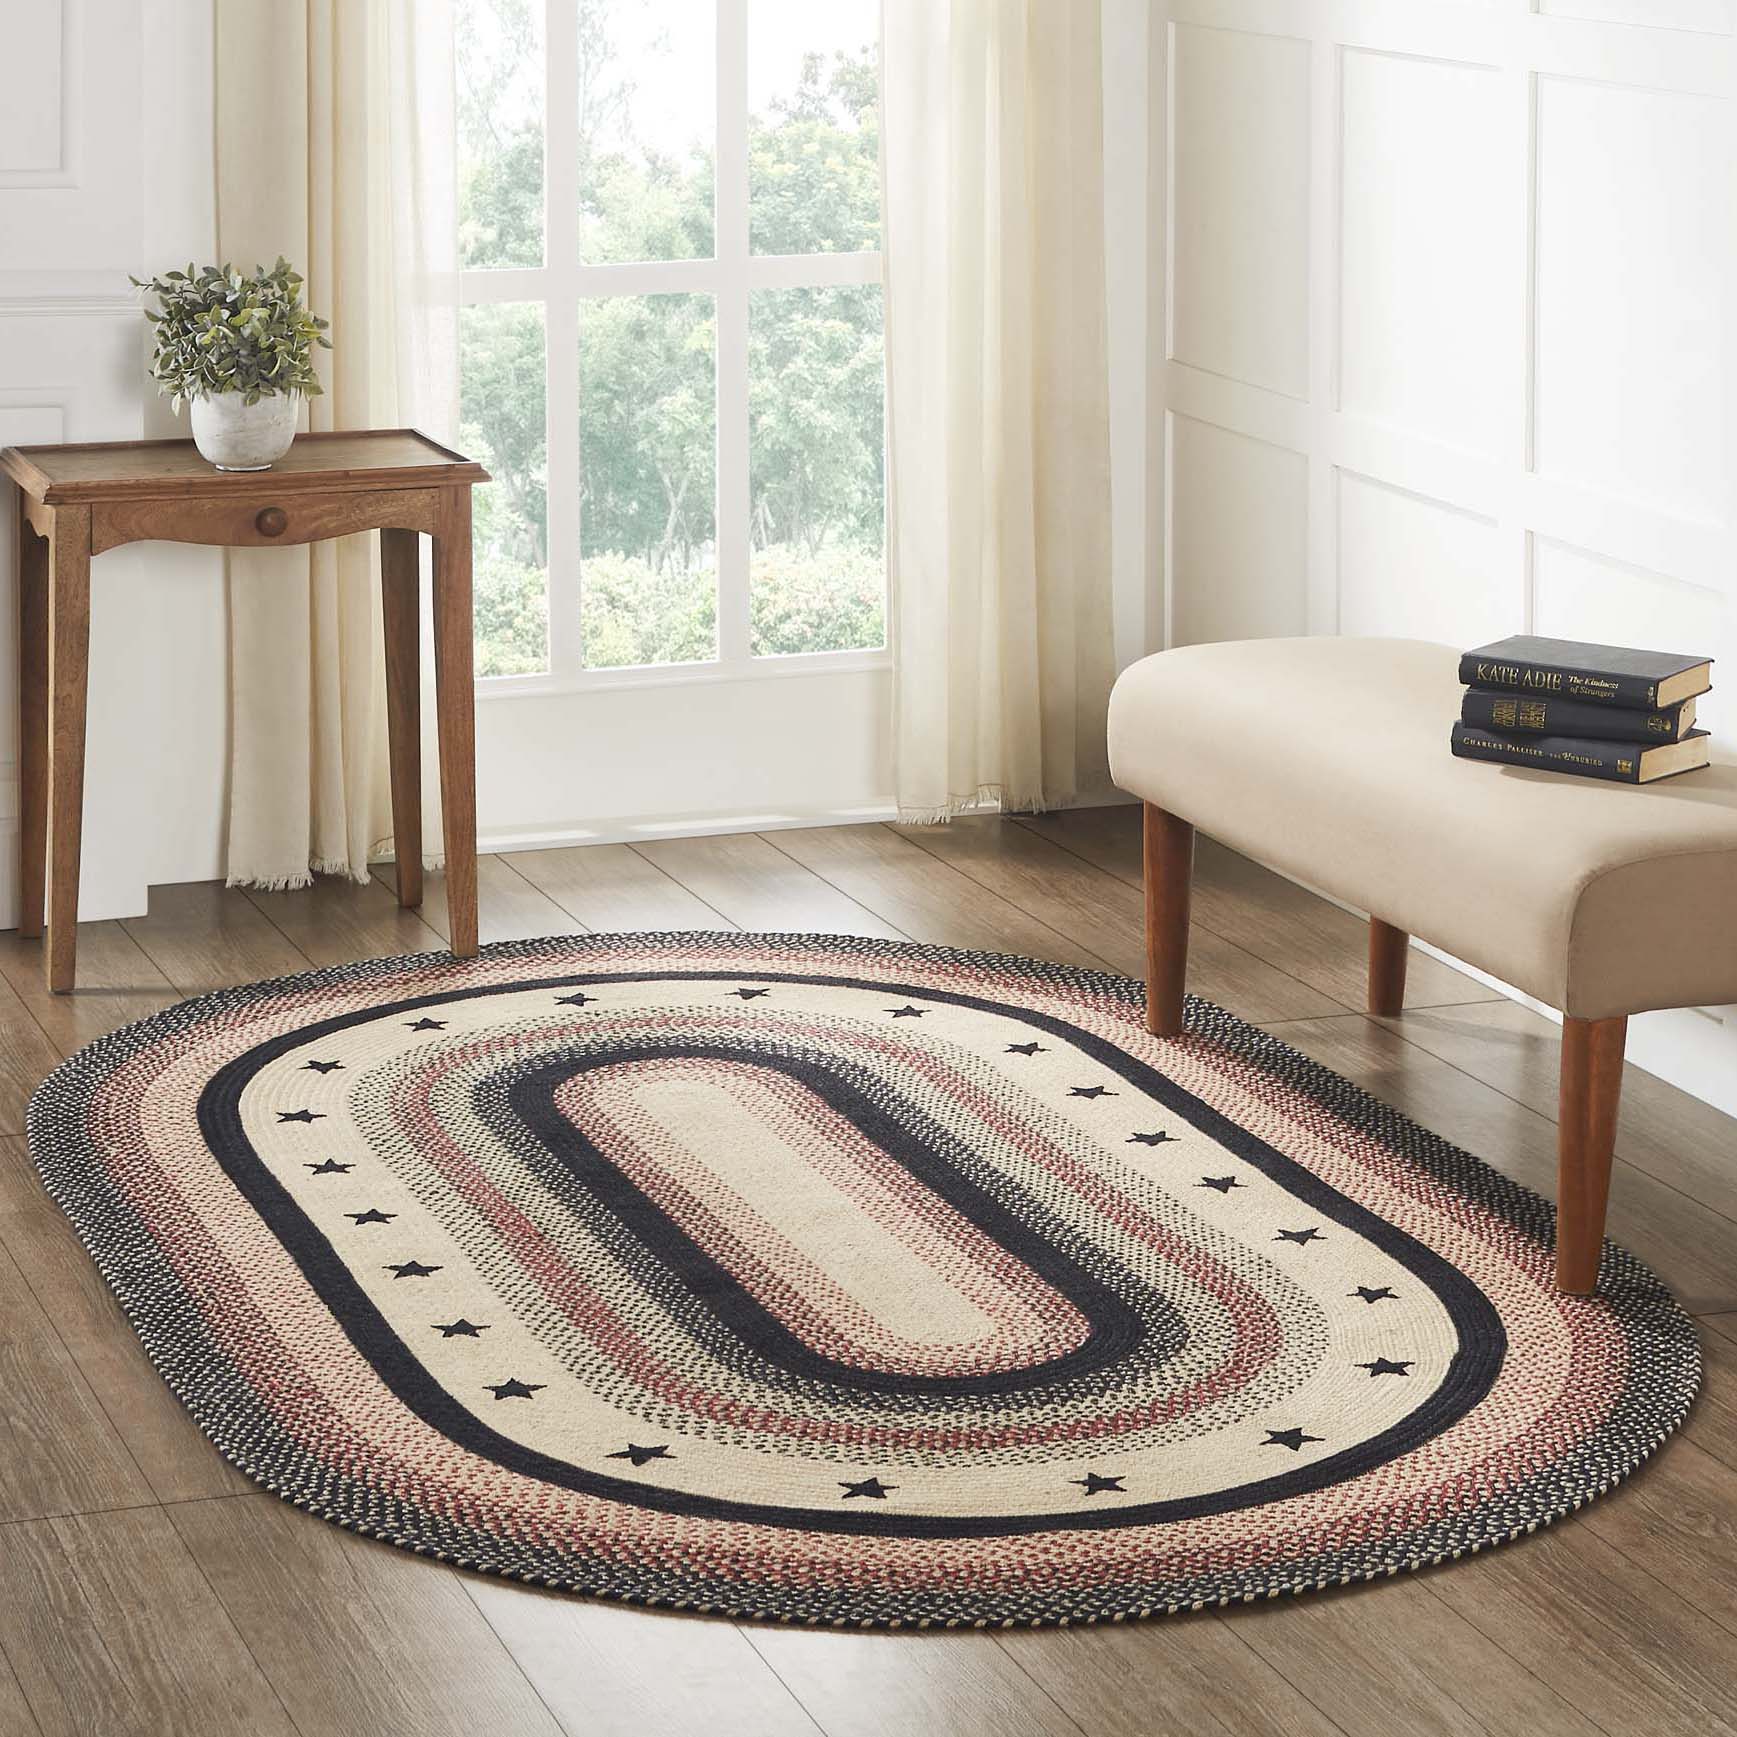 Blackstone Farm Collection Braided Rugs - Oval – Lange General Store